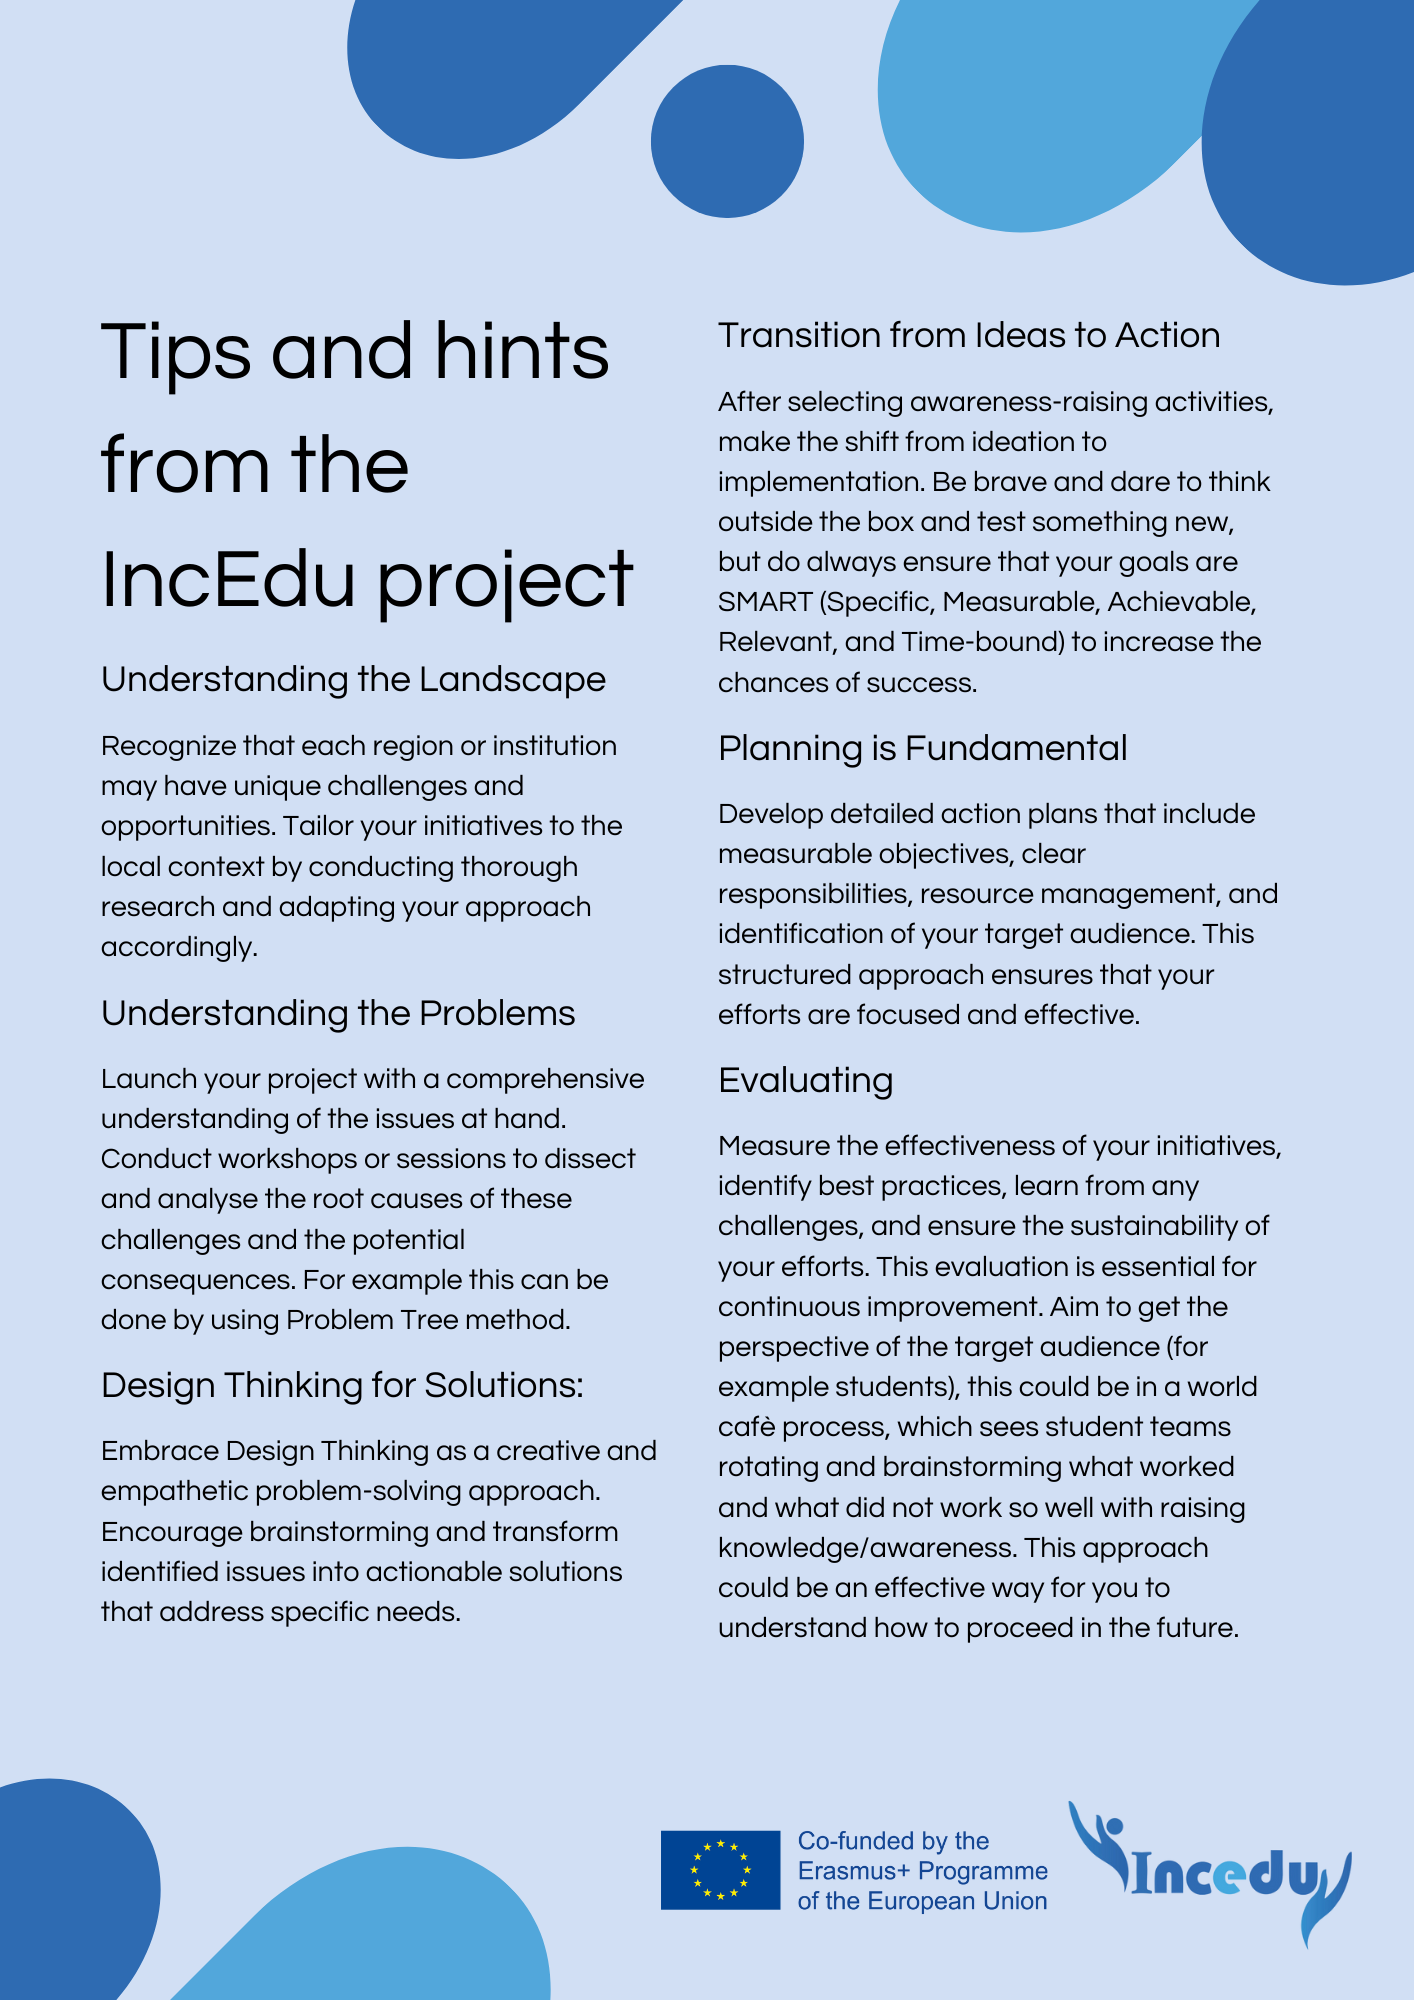 Tips and hints from the IncEdu project